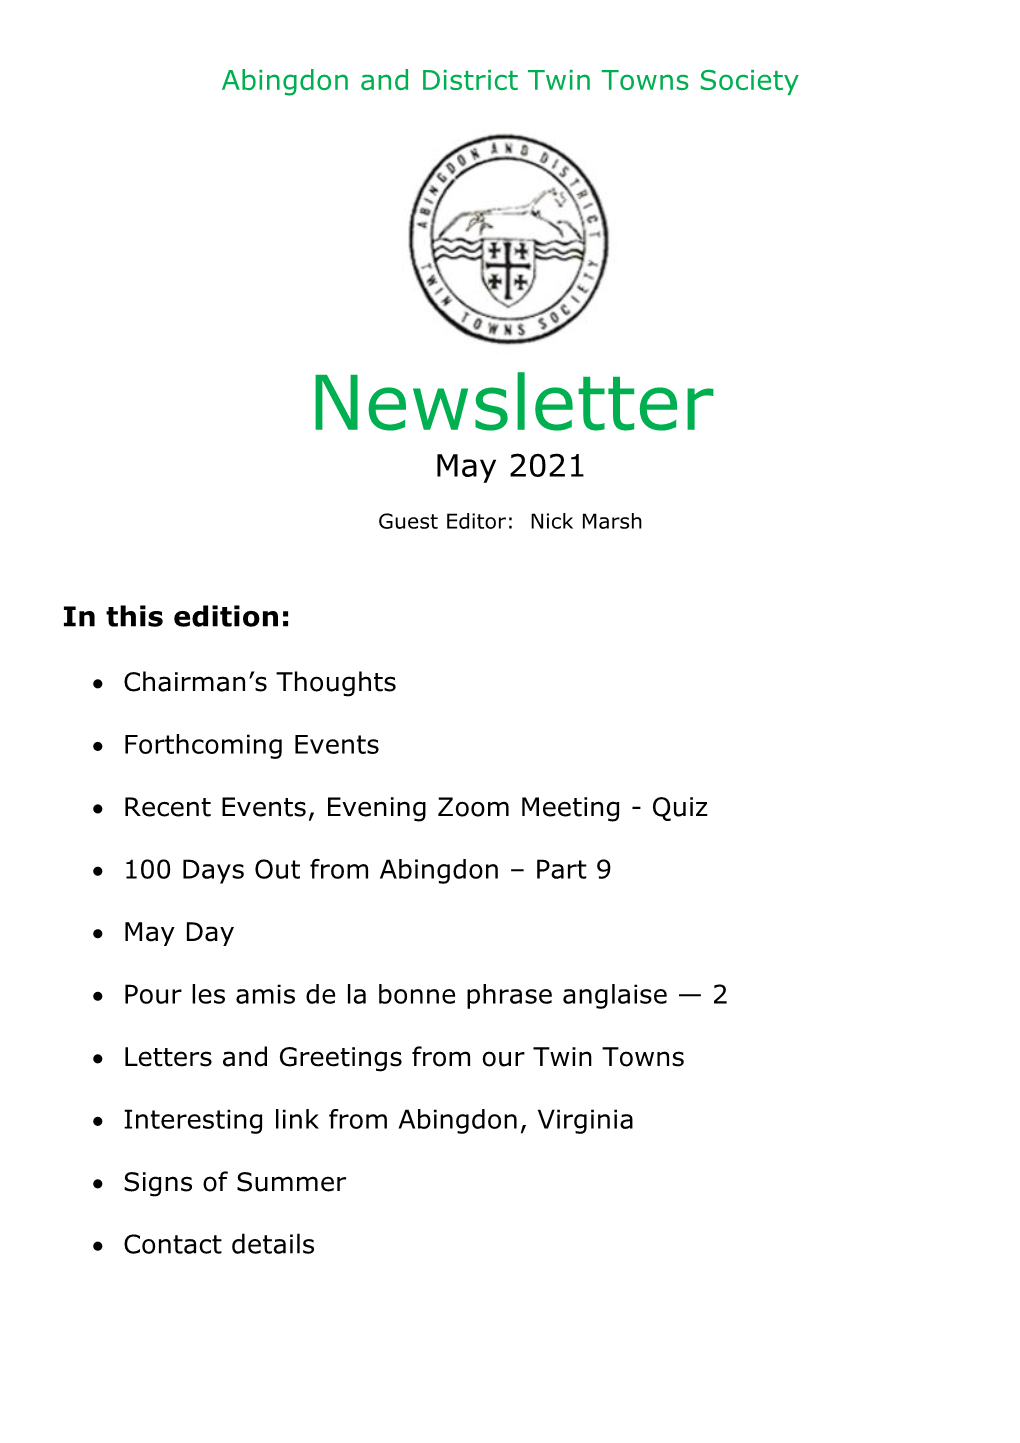 ADTTS Newsletter and Thank You So Much to Nick Marsh Our Guest Editor This Month